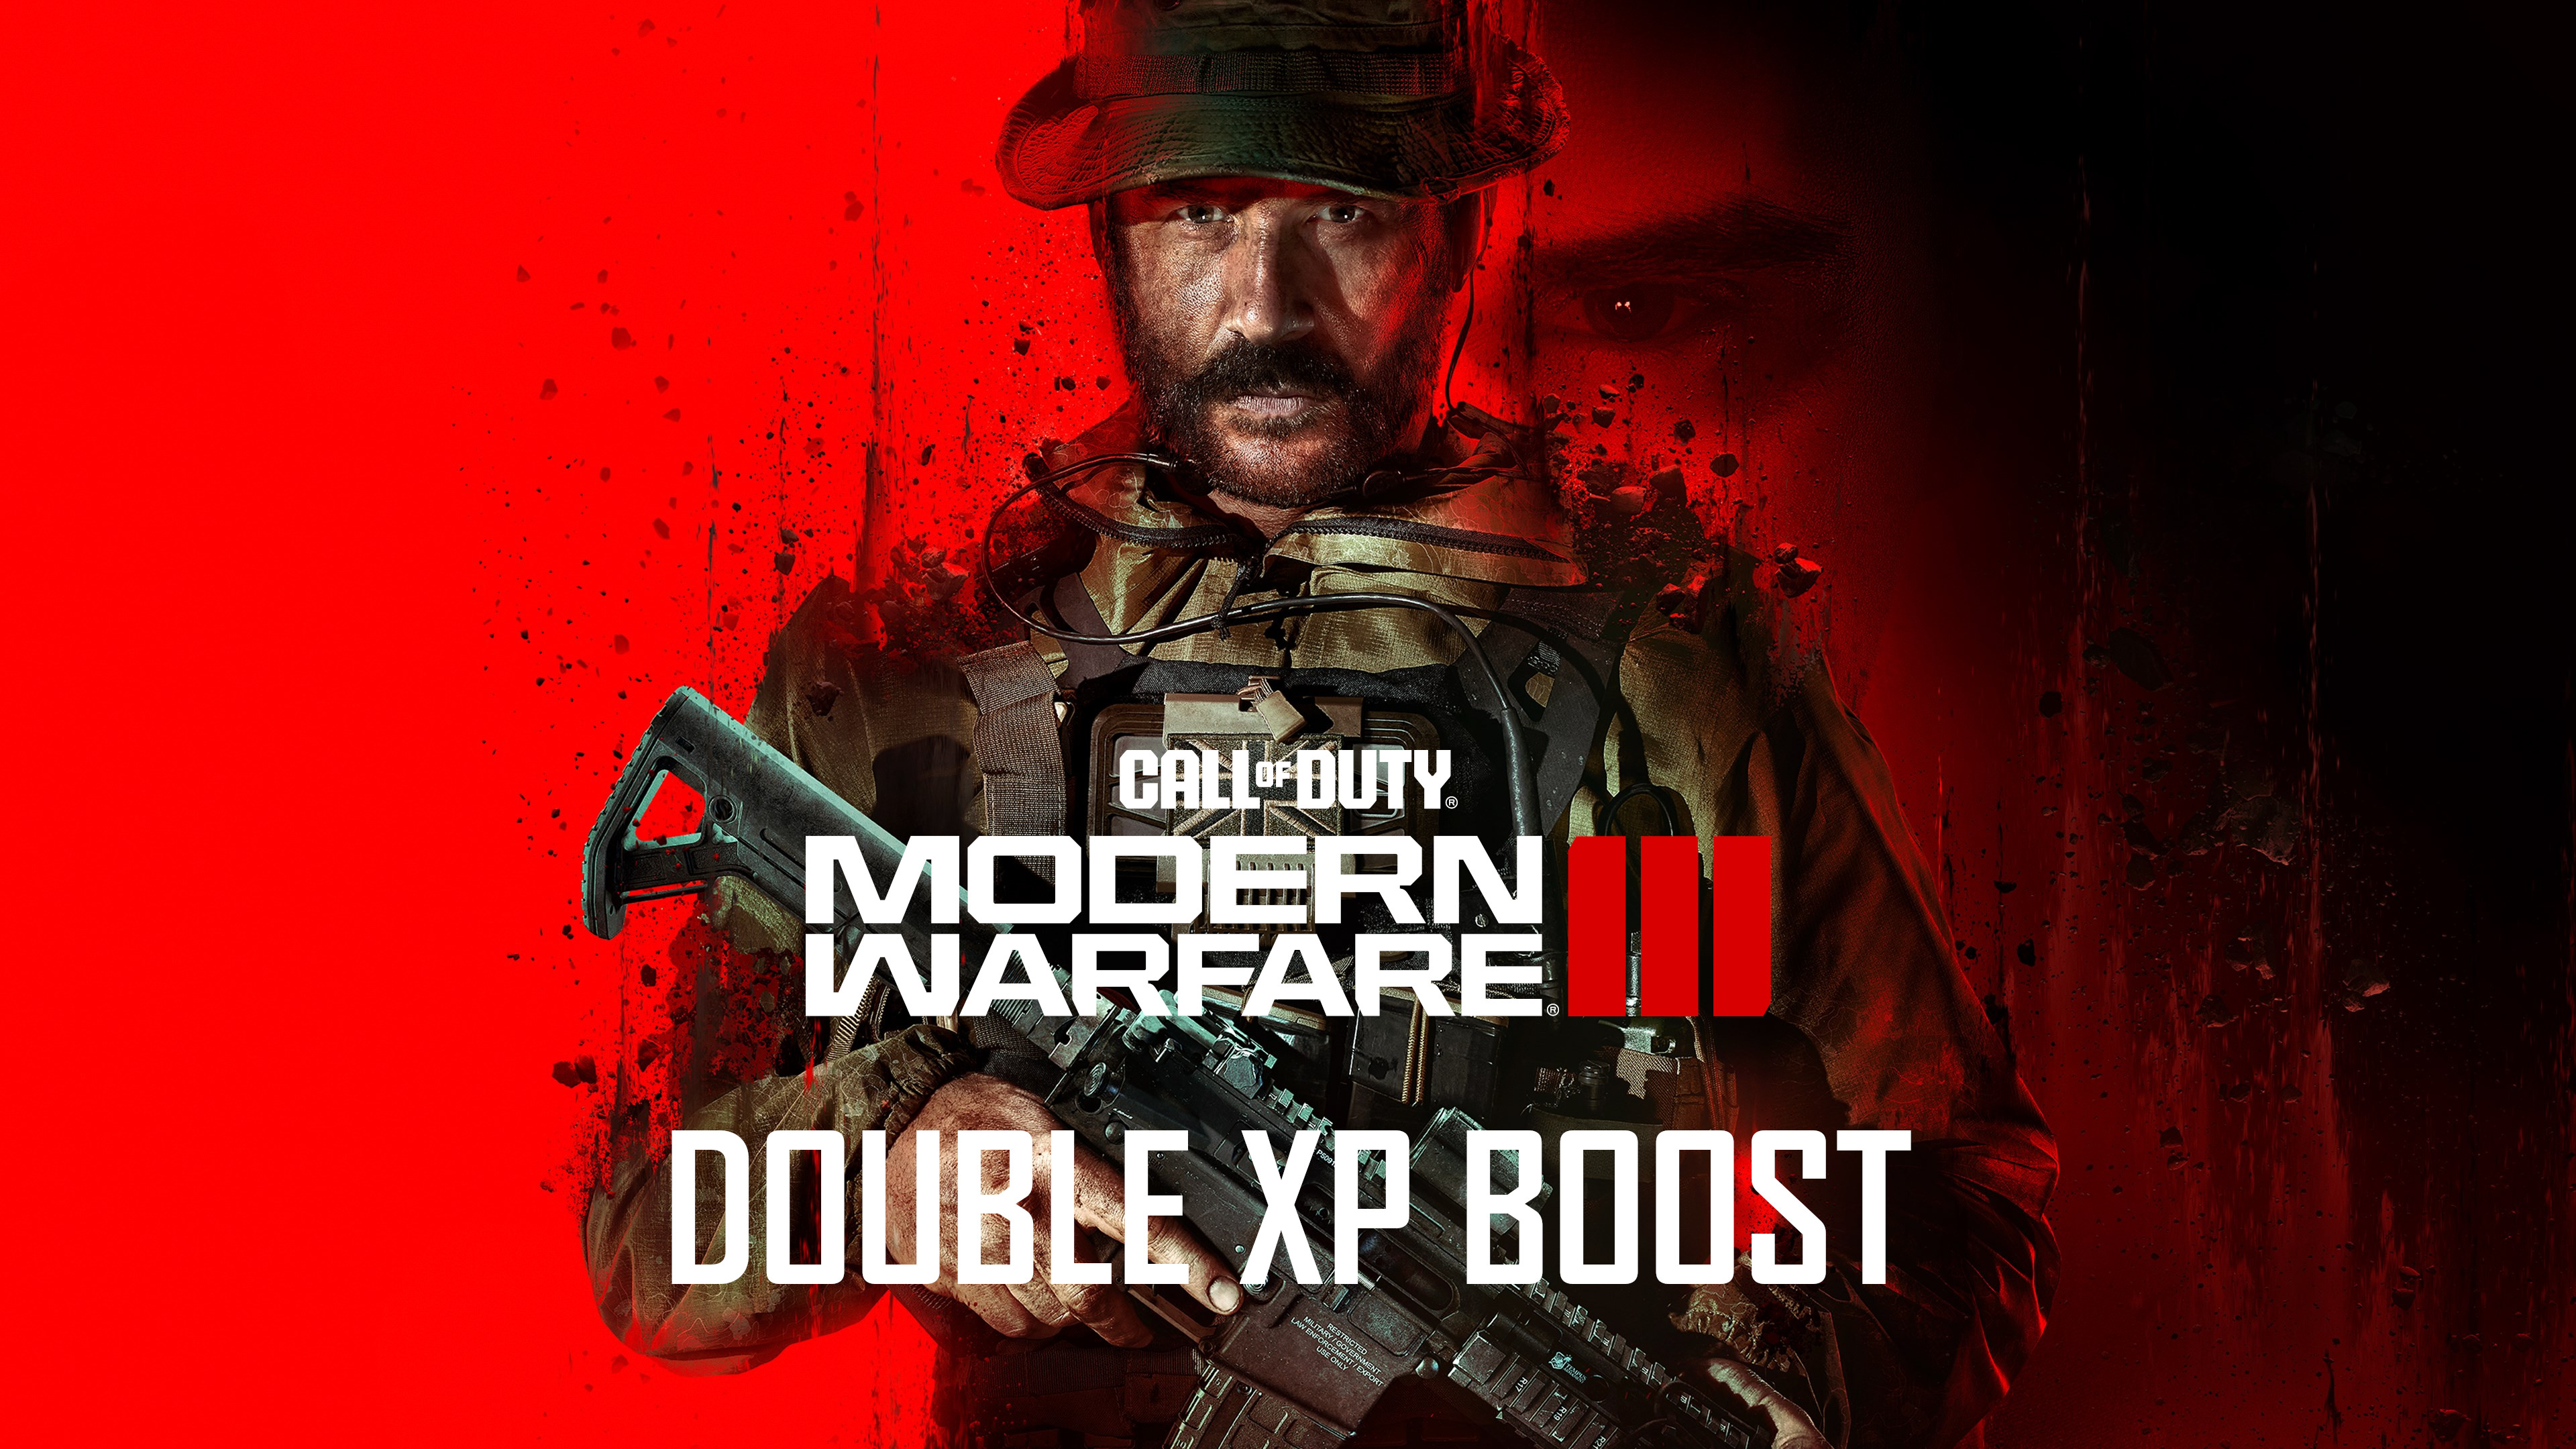 Call of Duty: Modern Warfare III - 2 Hours Double XP Boost + 2 Hours Weapon 2XP PC/PS4/PS5/XBOX One/Series X|S CD Key 14.68 $